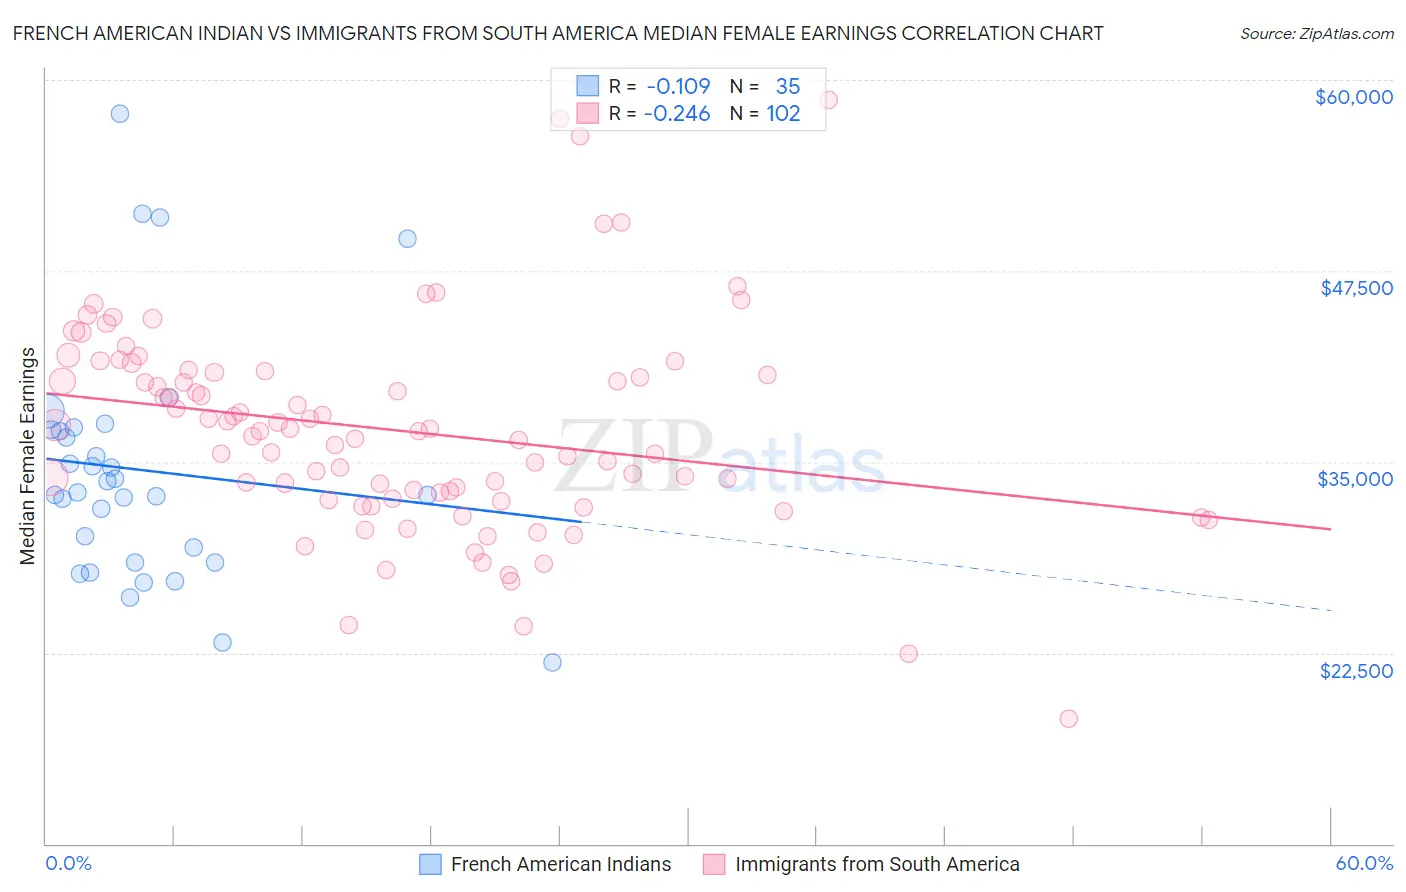 French American Indian vs Immigrants from South America Median Female Earnings